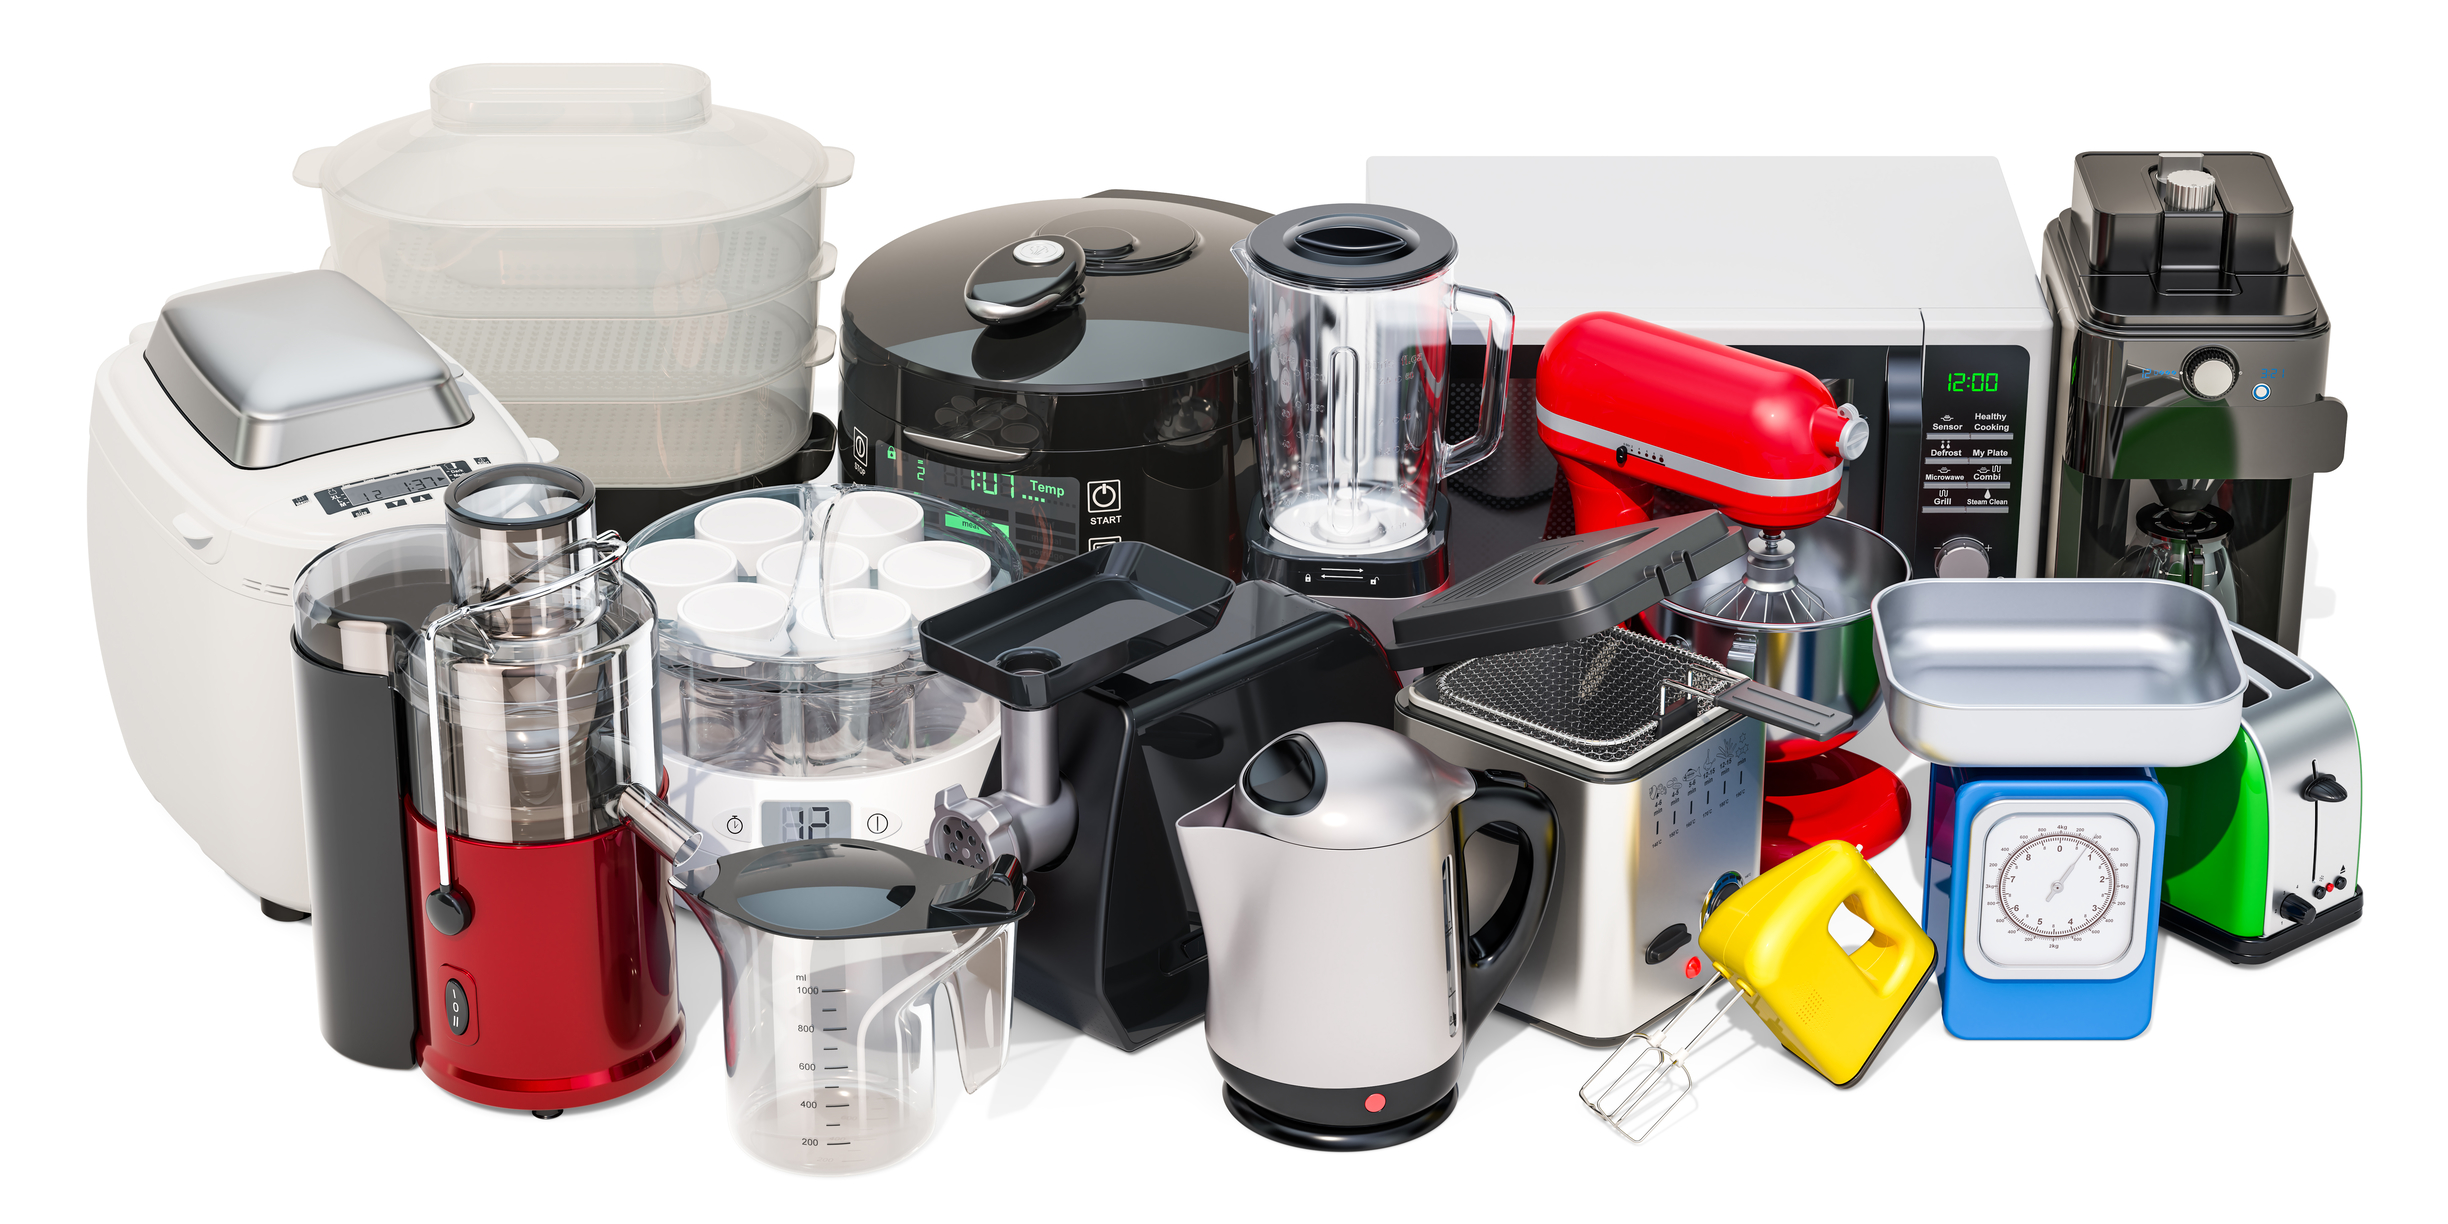 The Best Time and Place To Buy Small Kitchen Appliances